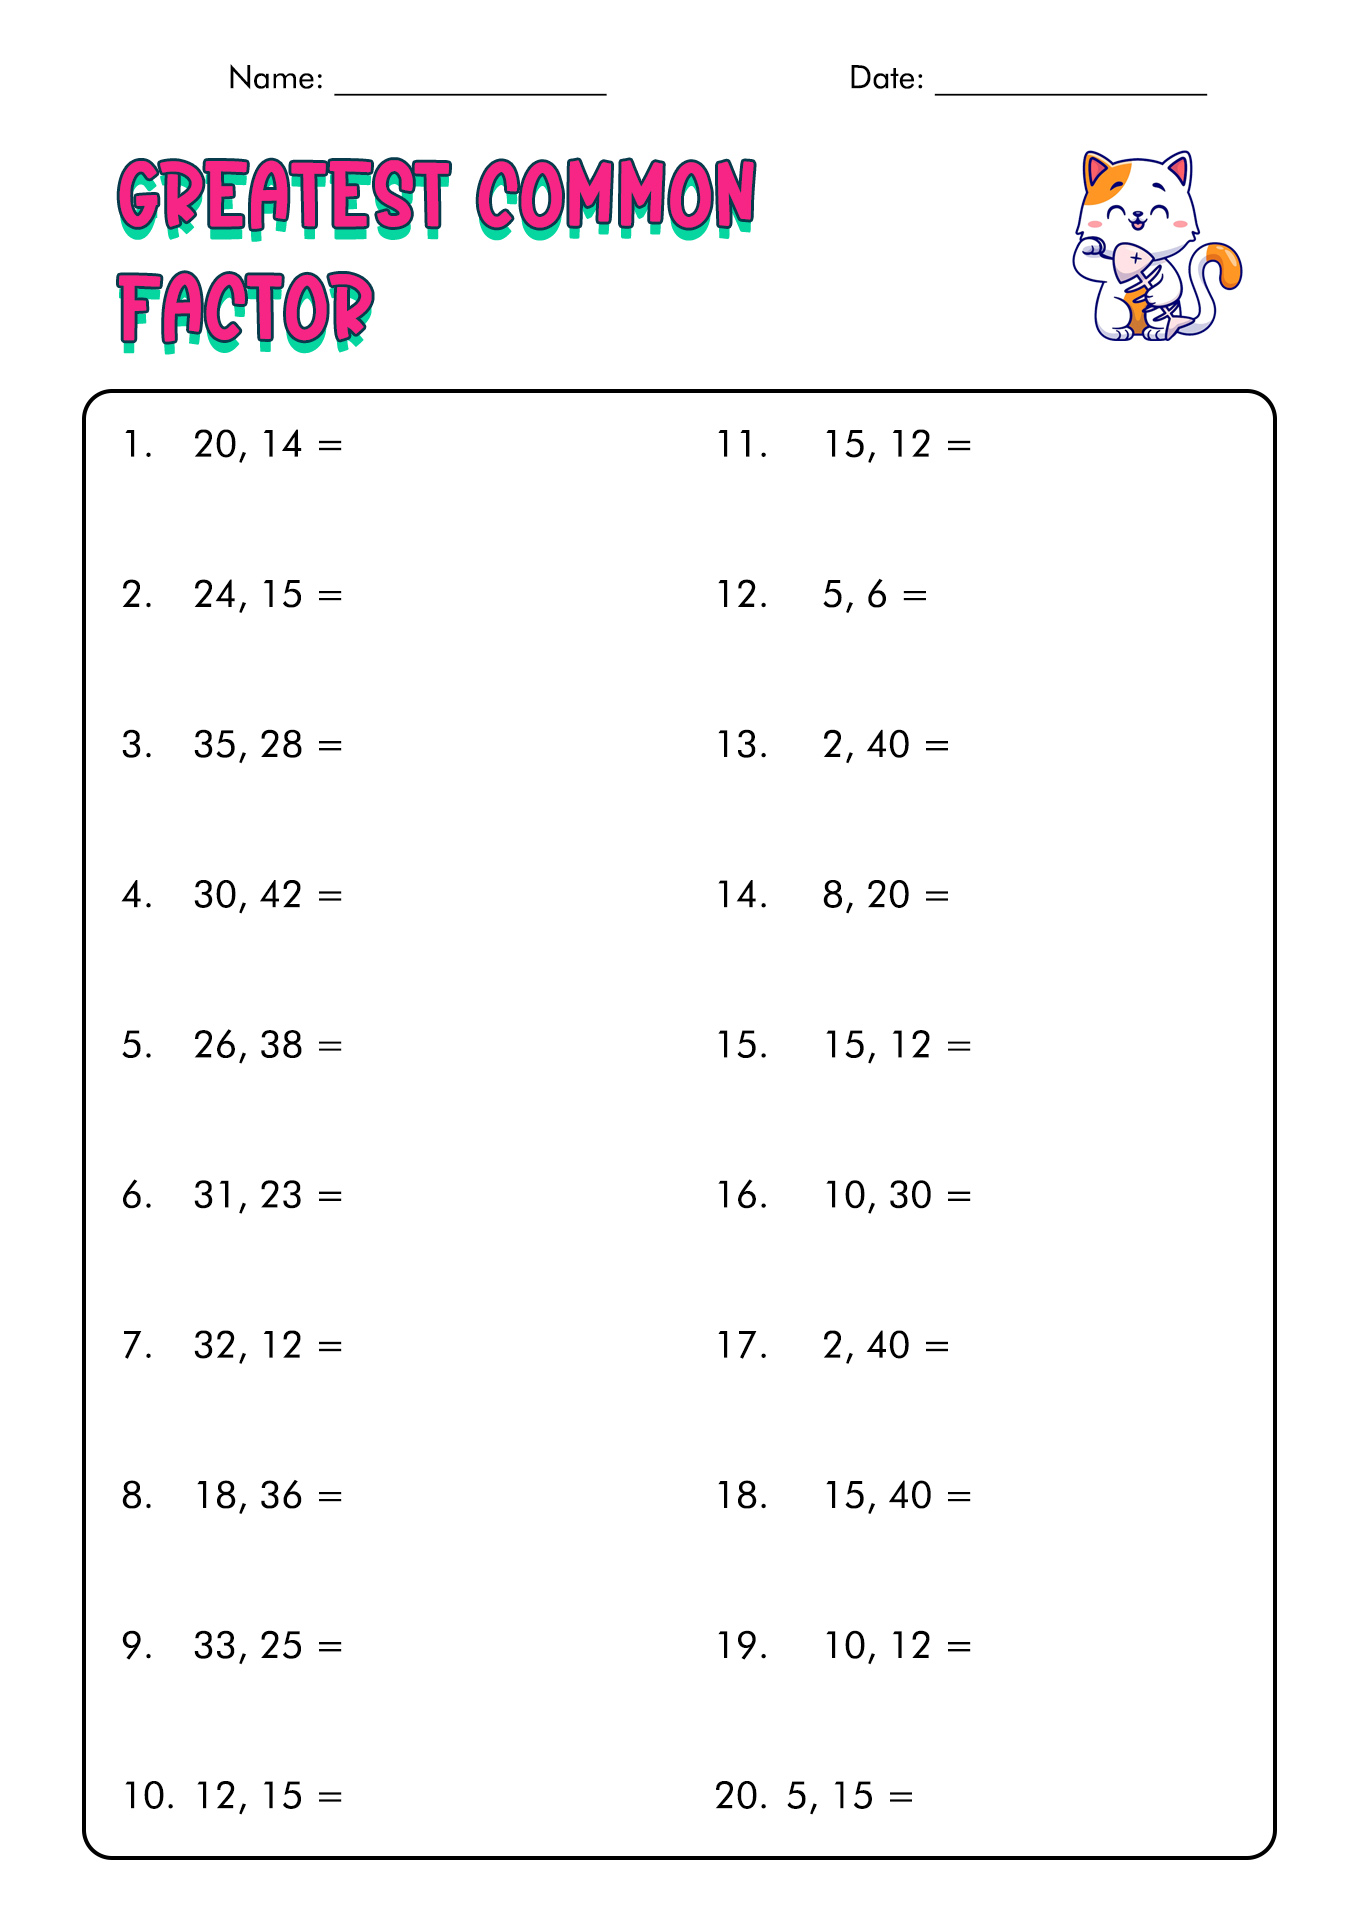 common-factor-worksheets